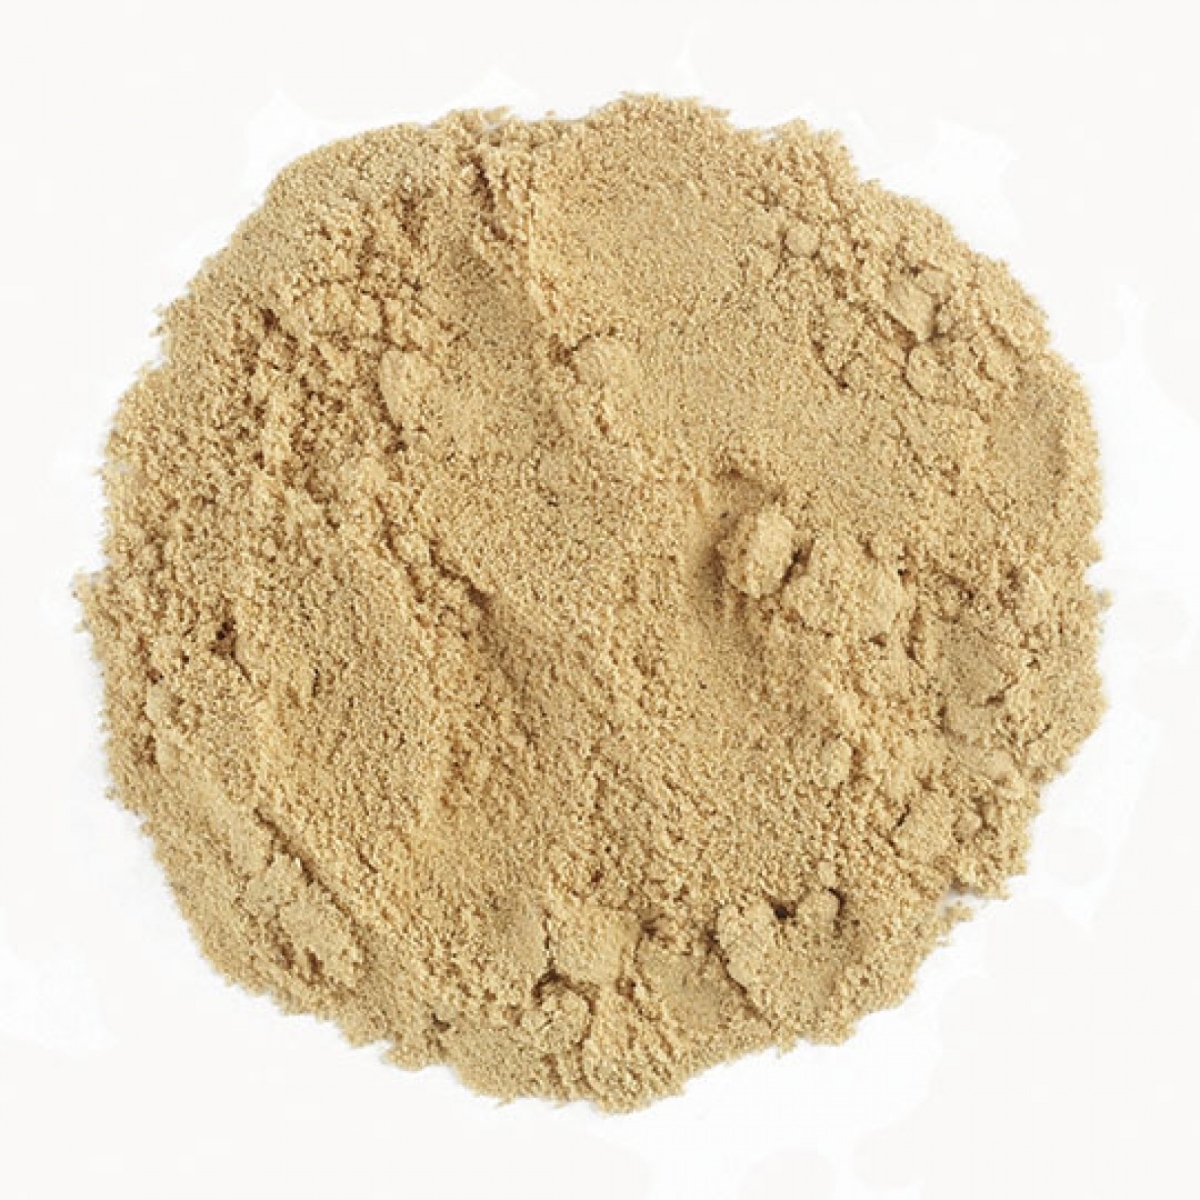 Picture of Frontier 31079 Organic Ginger Root Ground Powder